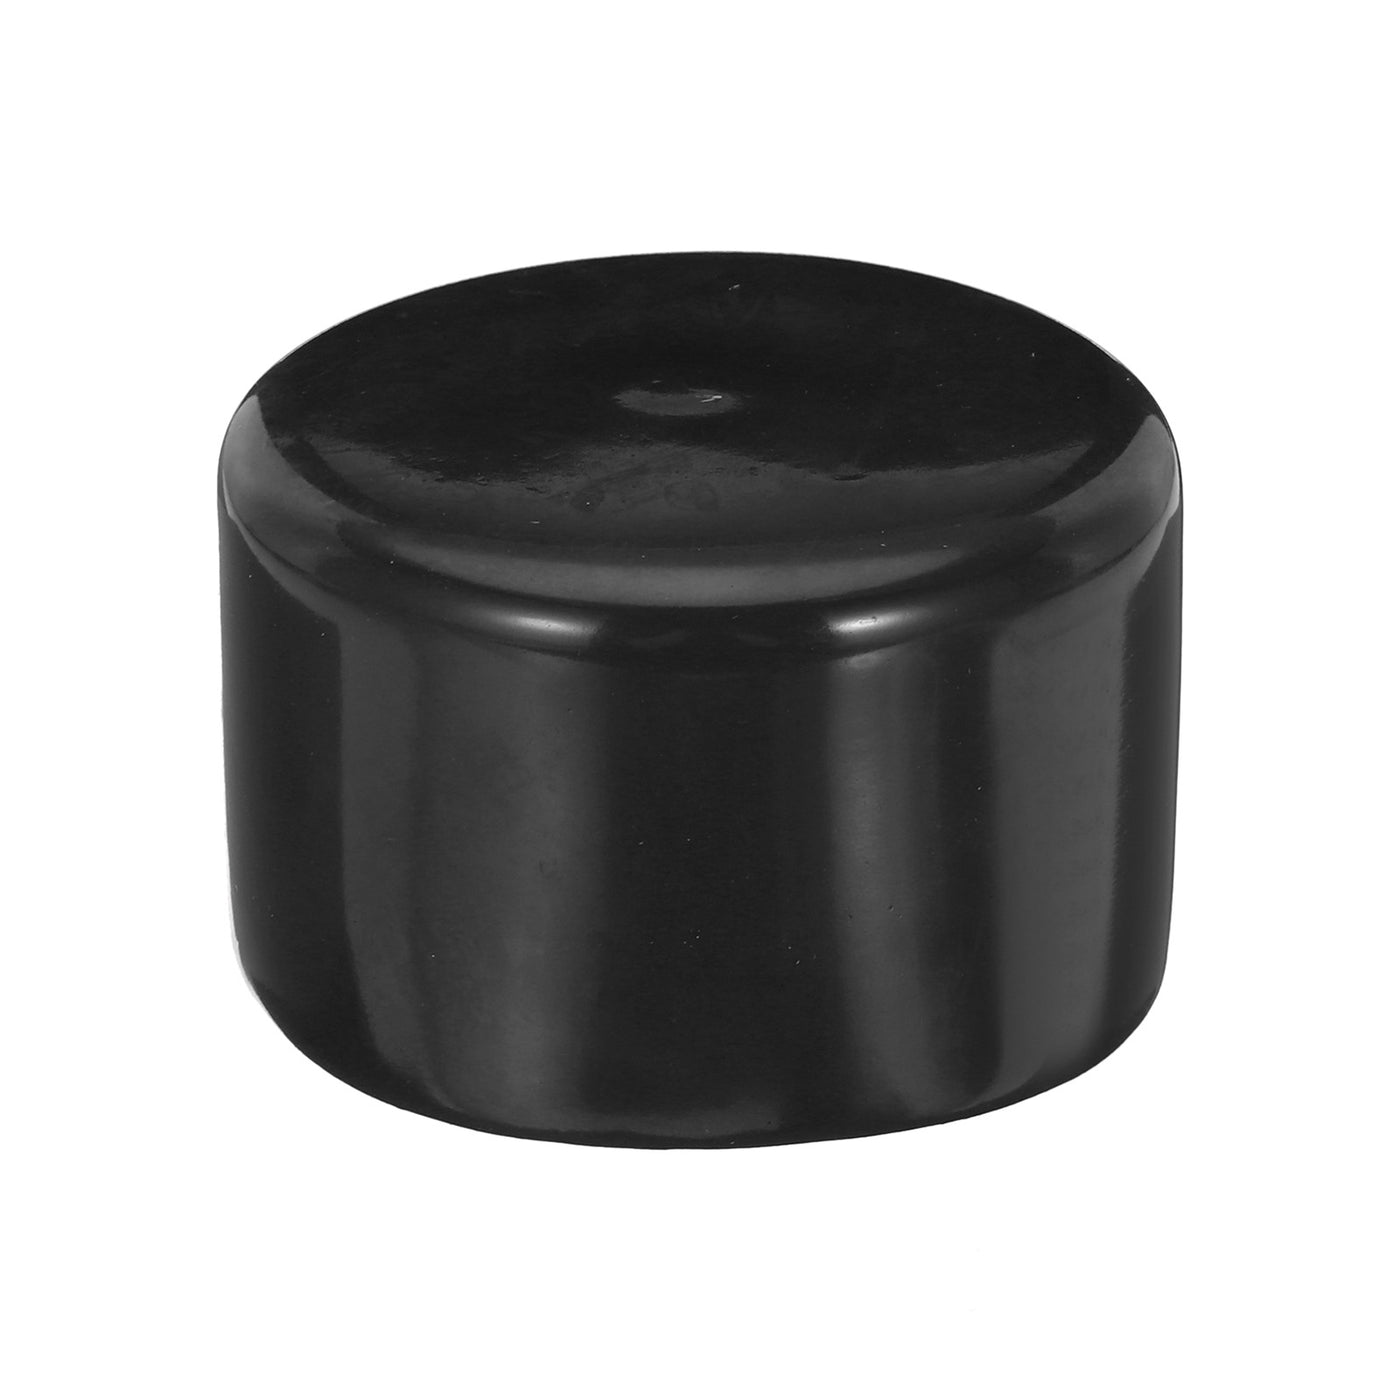 uxcell Uxcell Rubber End Caps 100mm ID Vinyl Round Tube Bolt Cap Cover Screw Thread Protectors Black